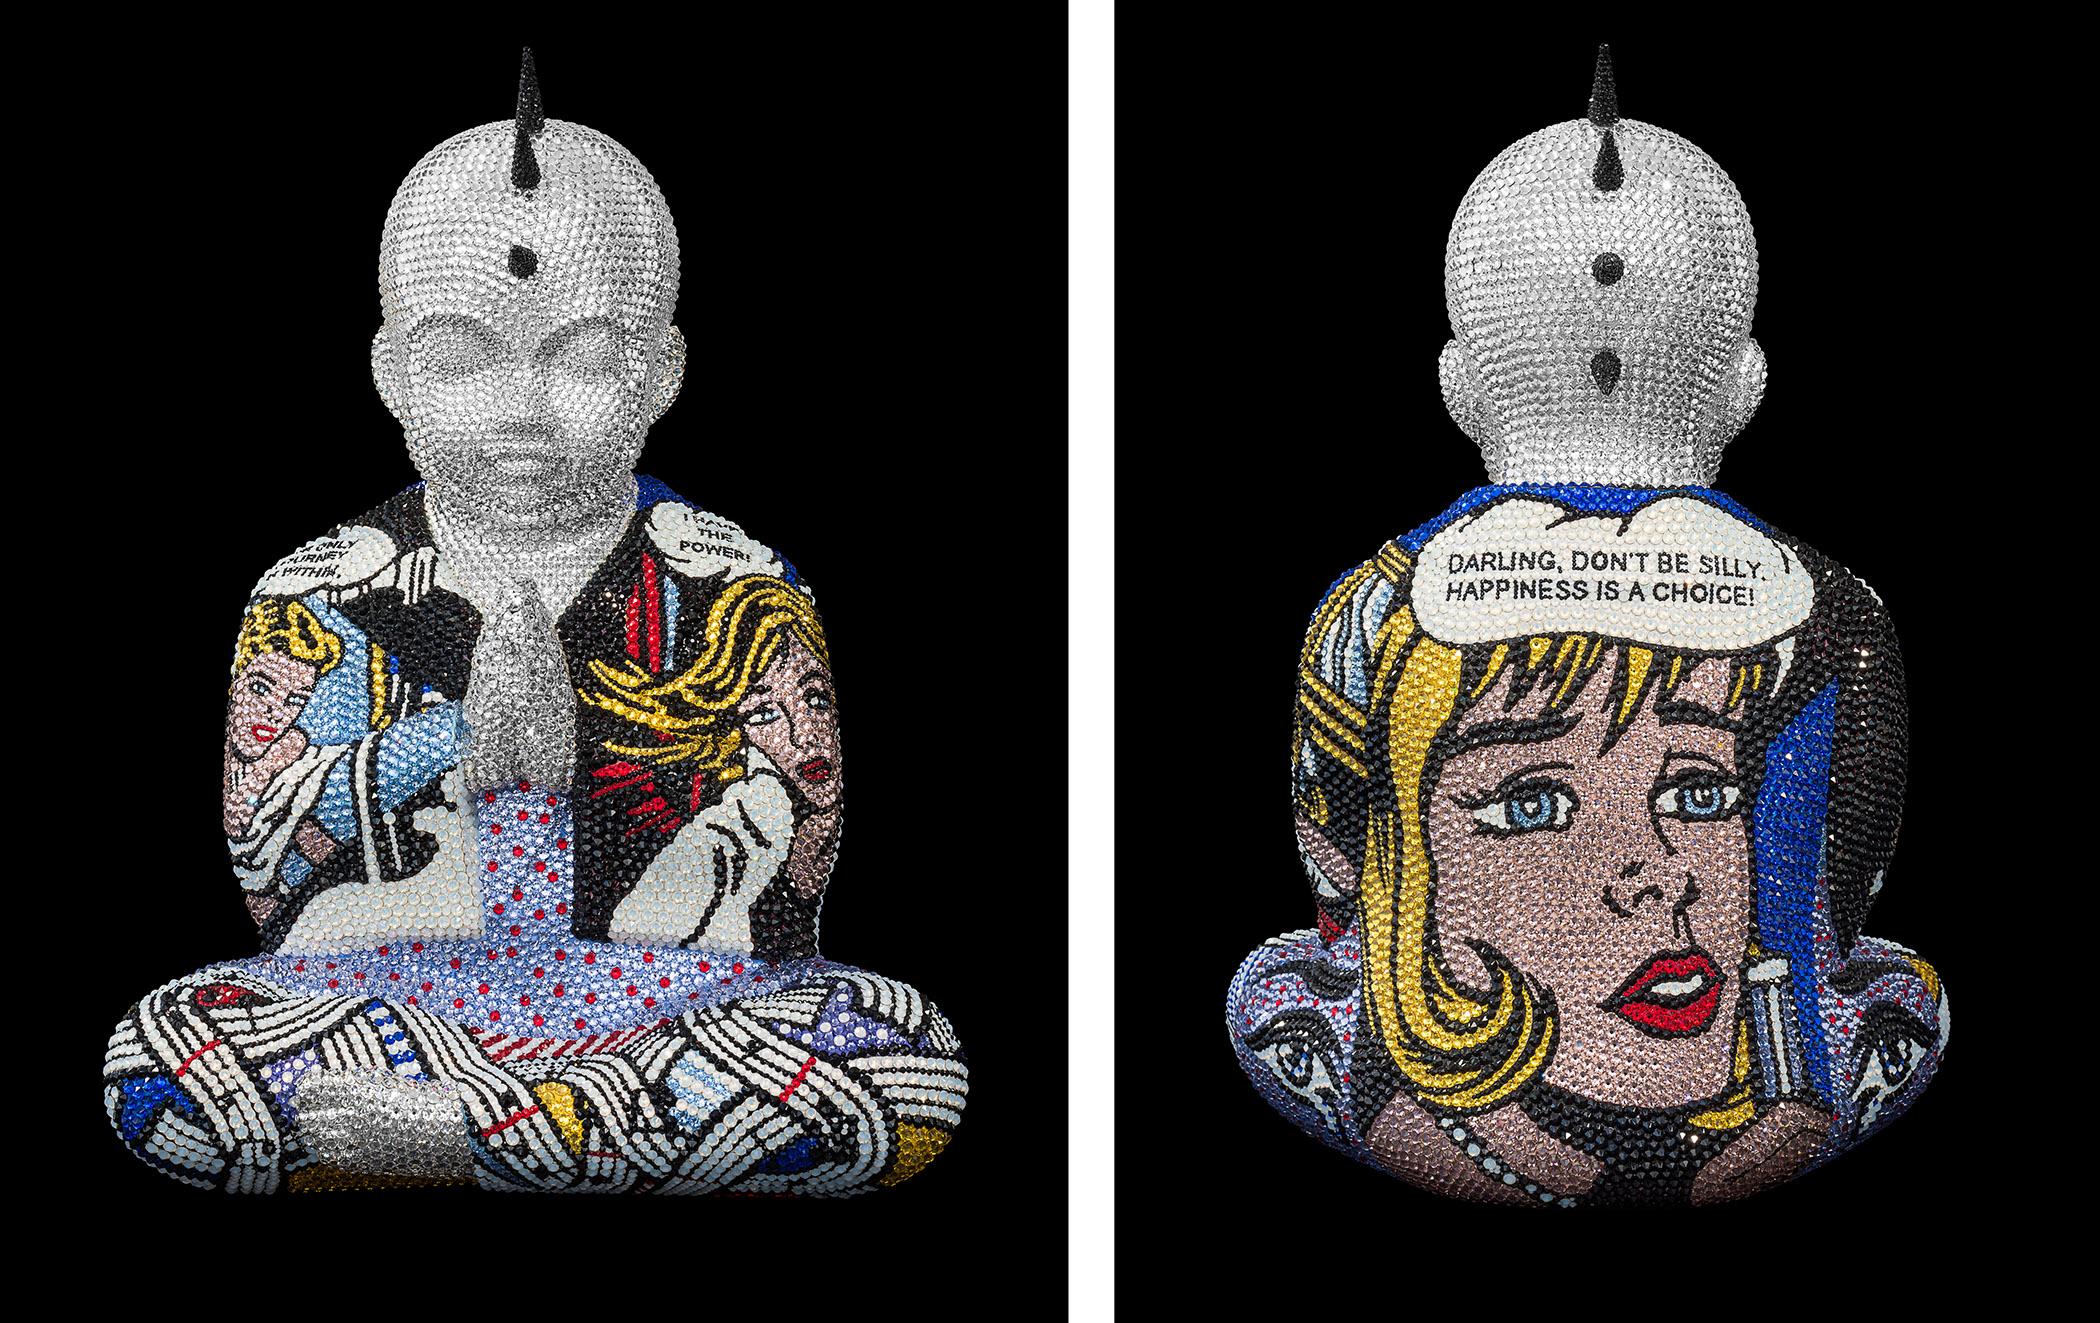 Metis Atash Figurative Sculpture - PUNKBUDDHA large "AS LONG AS I HAVE A SONG" feat Lichtenstein